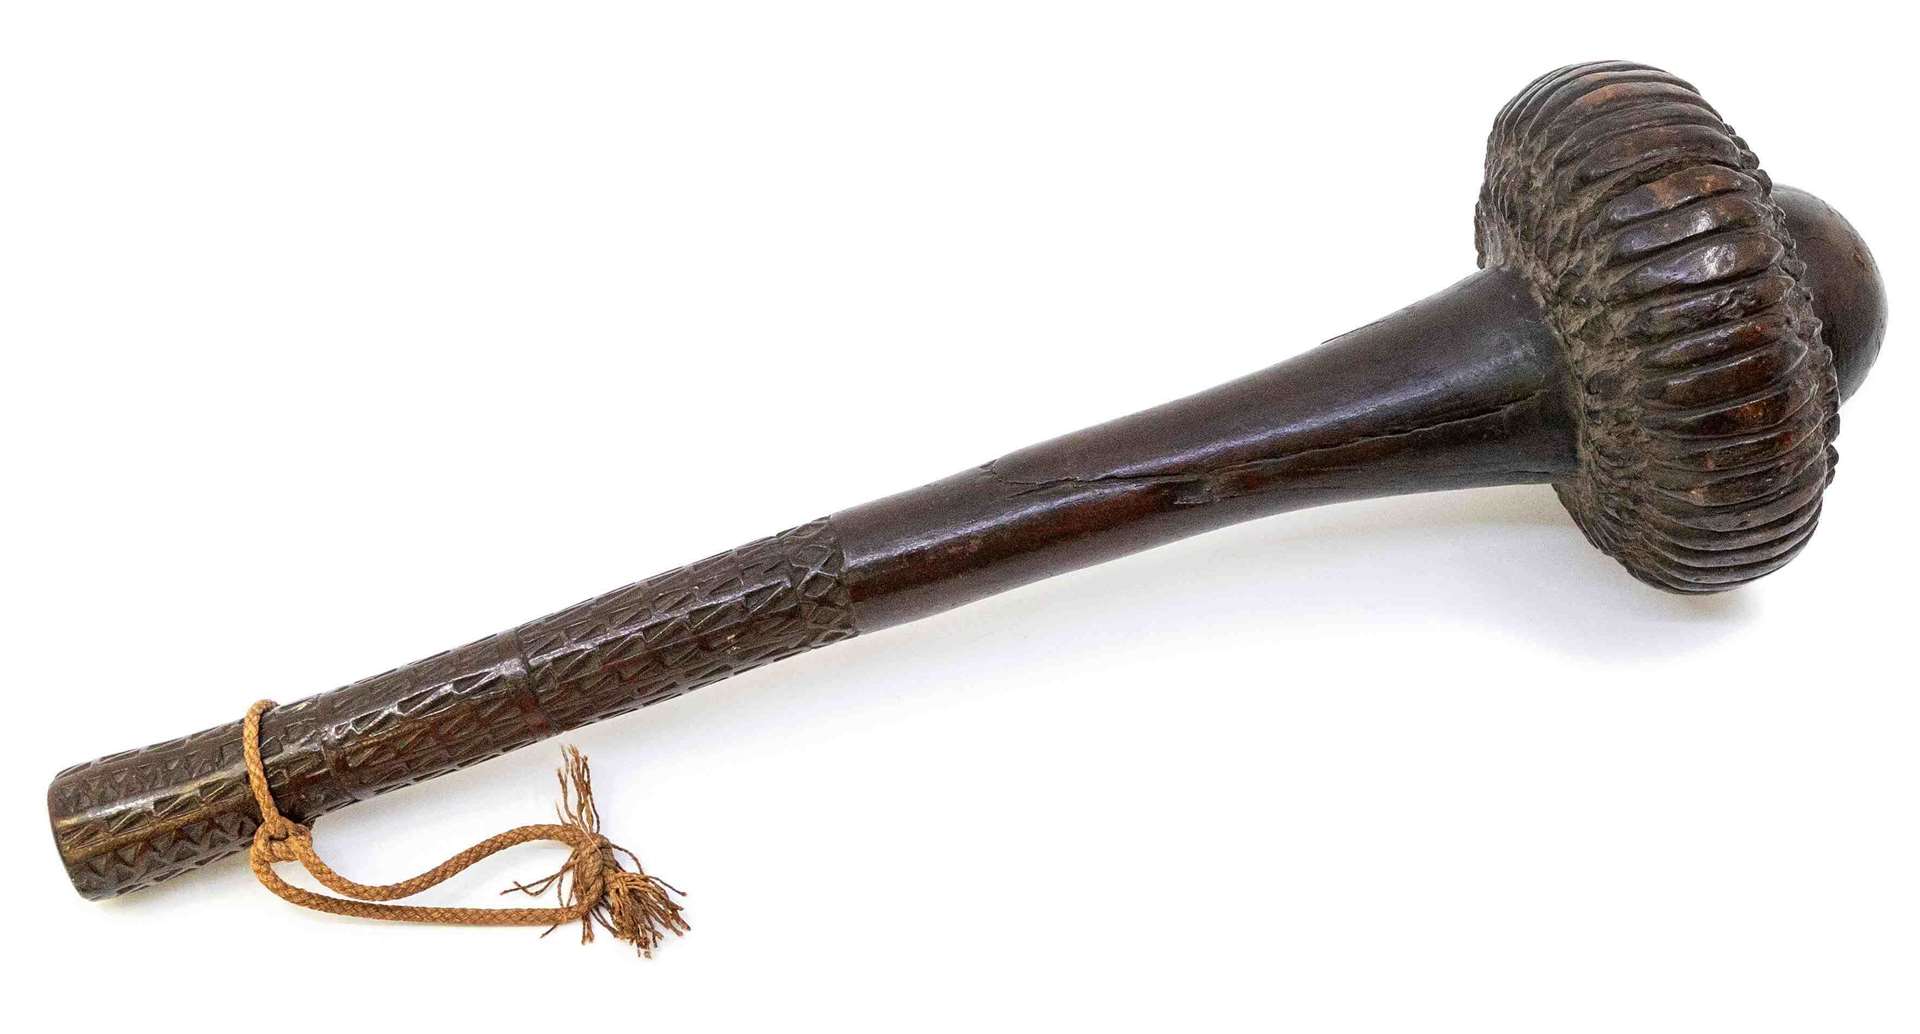 The 18th century tribal weapon from Fiji could be sold for over £600. Picture: Mark Laban Hansons